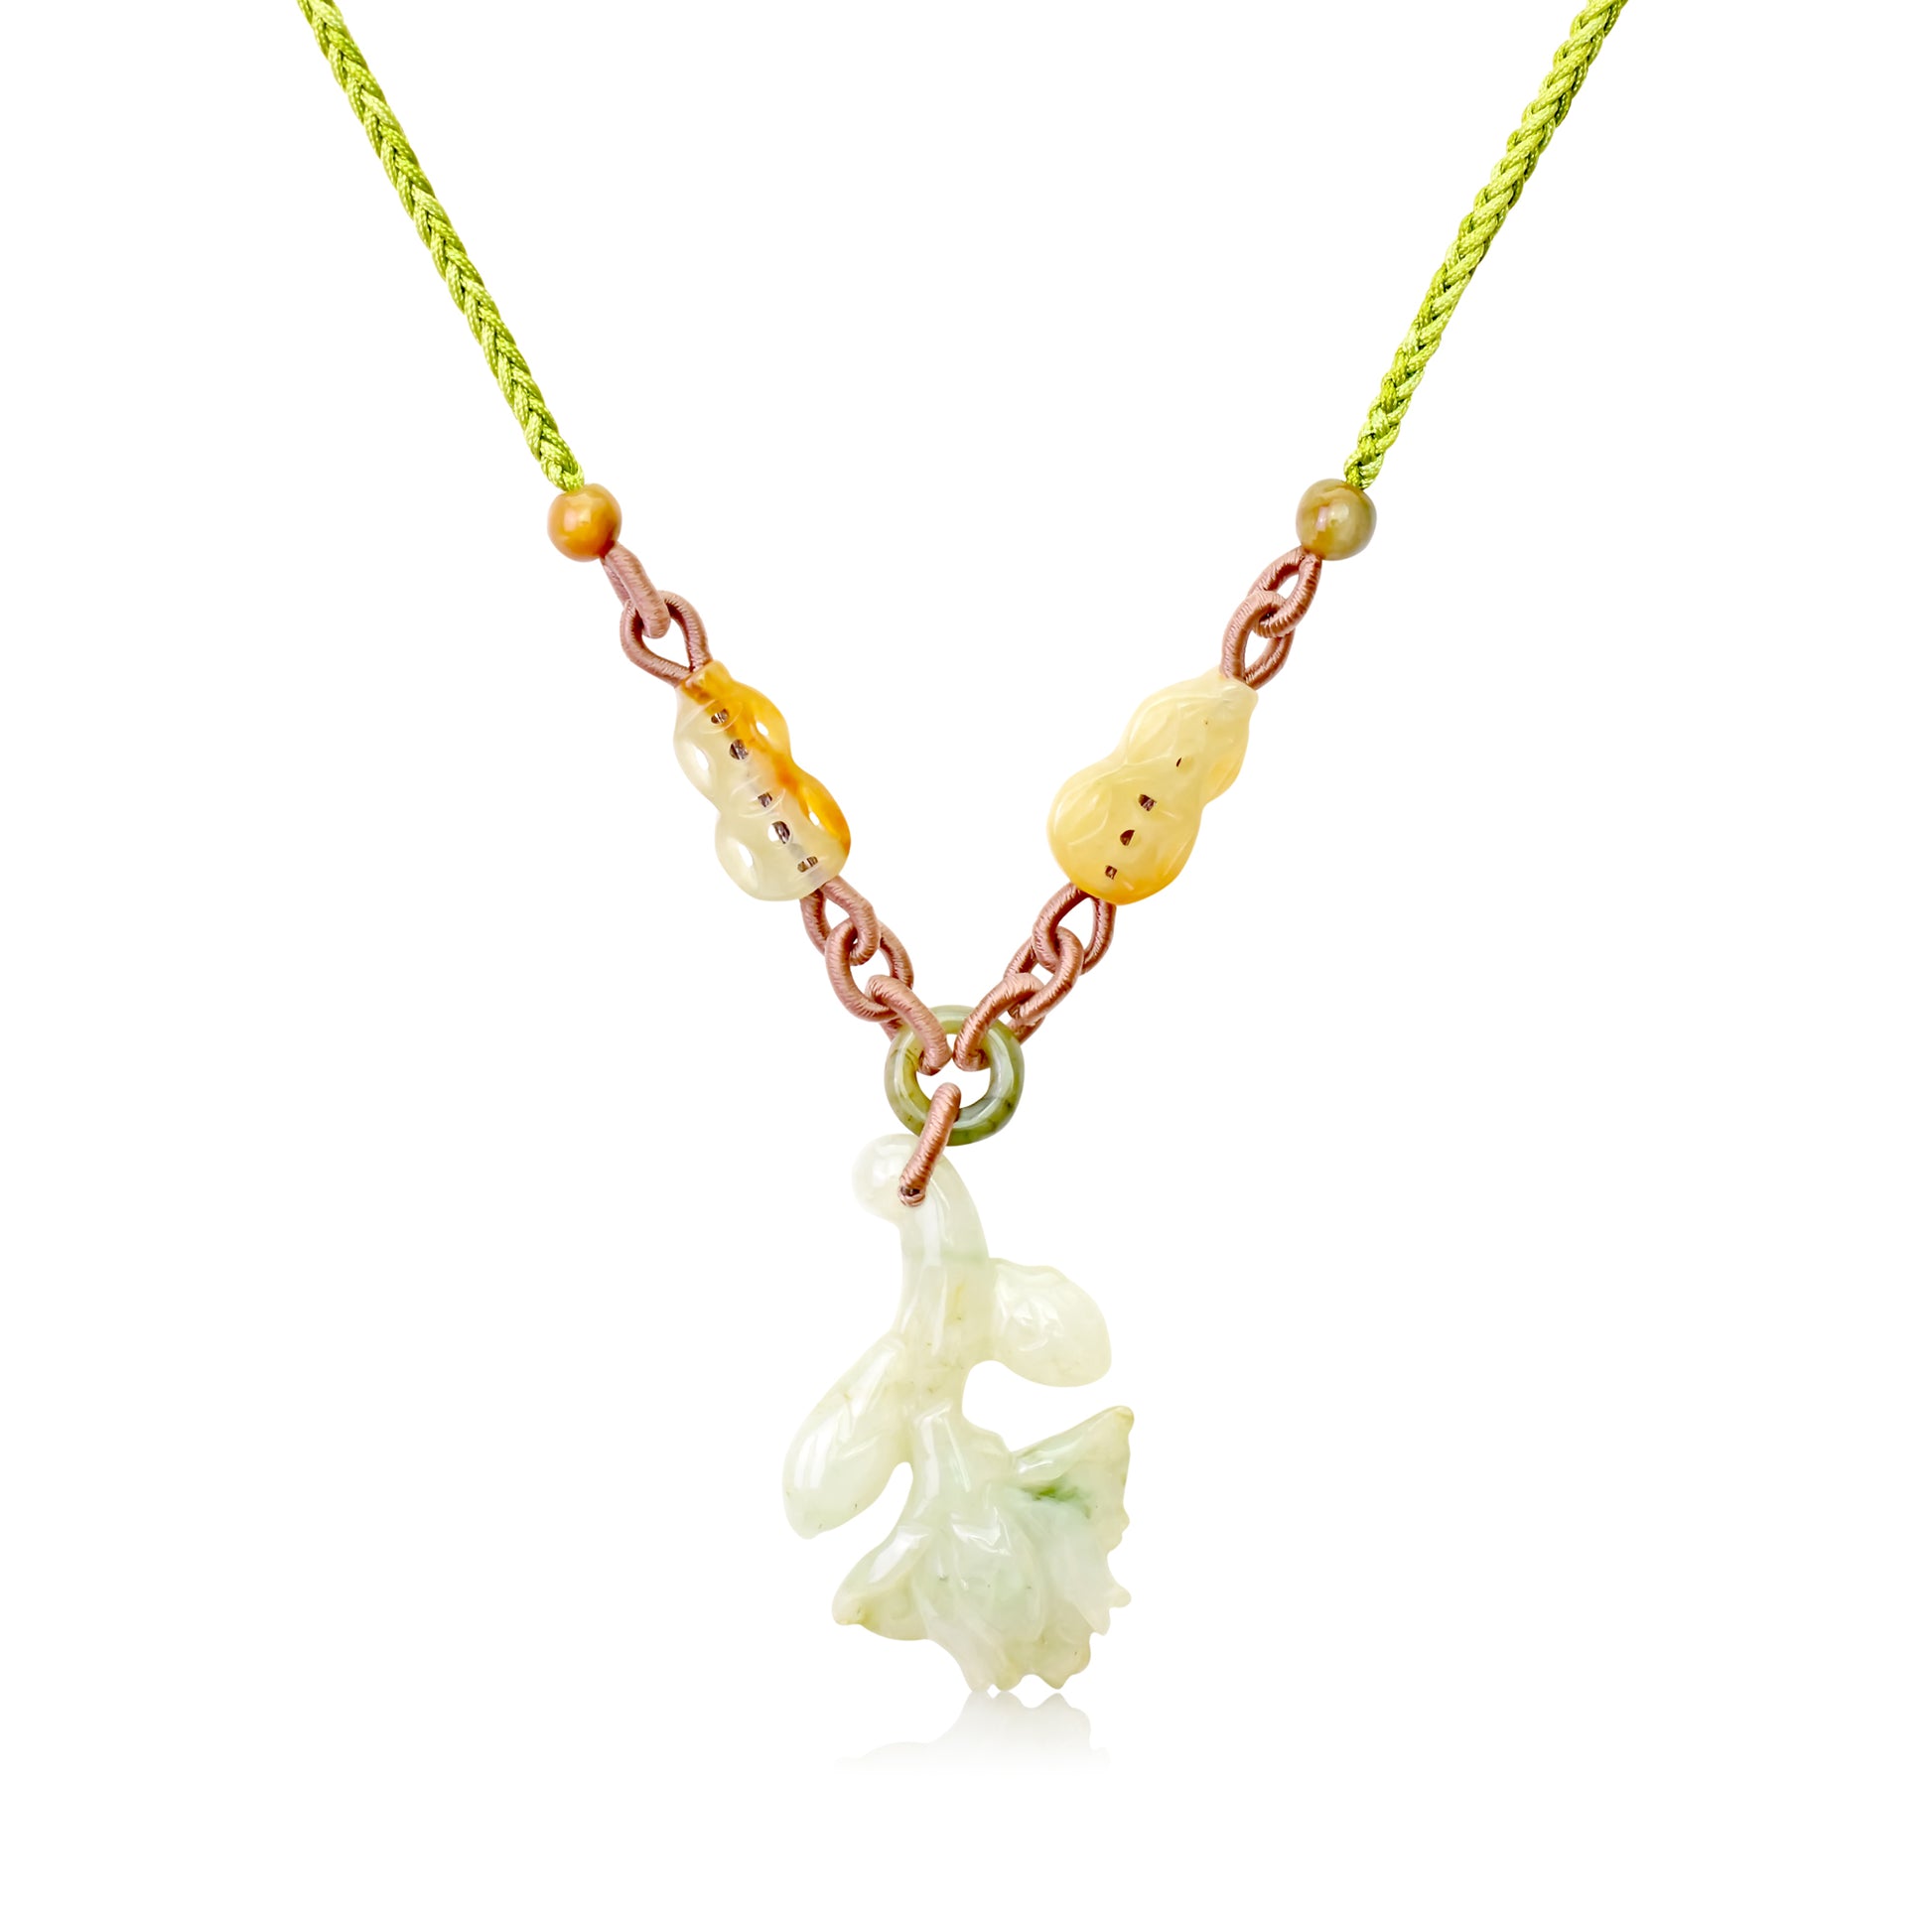 Show Your Strength and Resilience with a Protea Flower Necklace made with Lime Cord